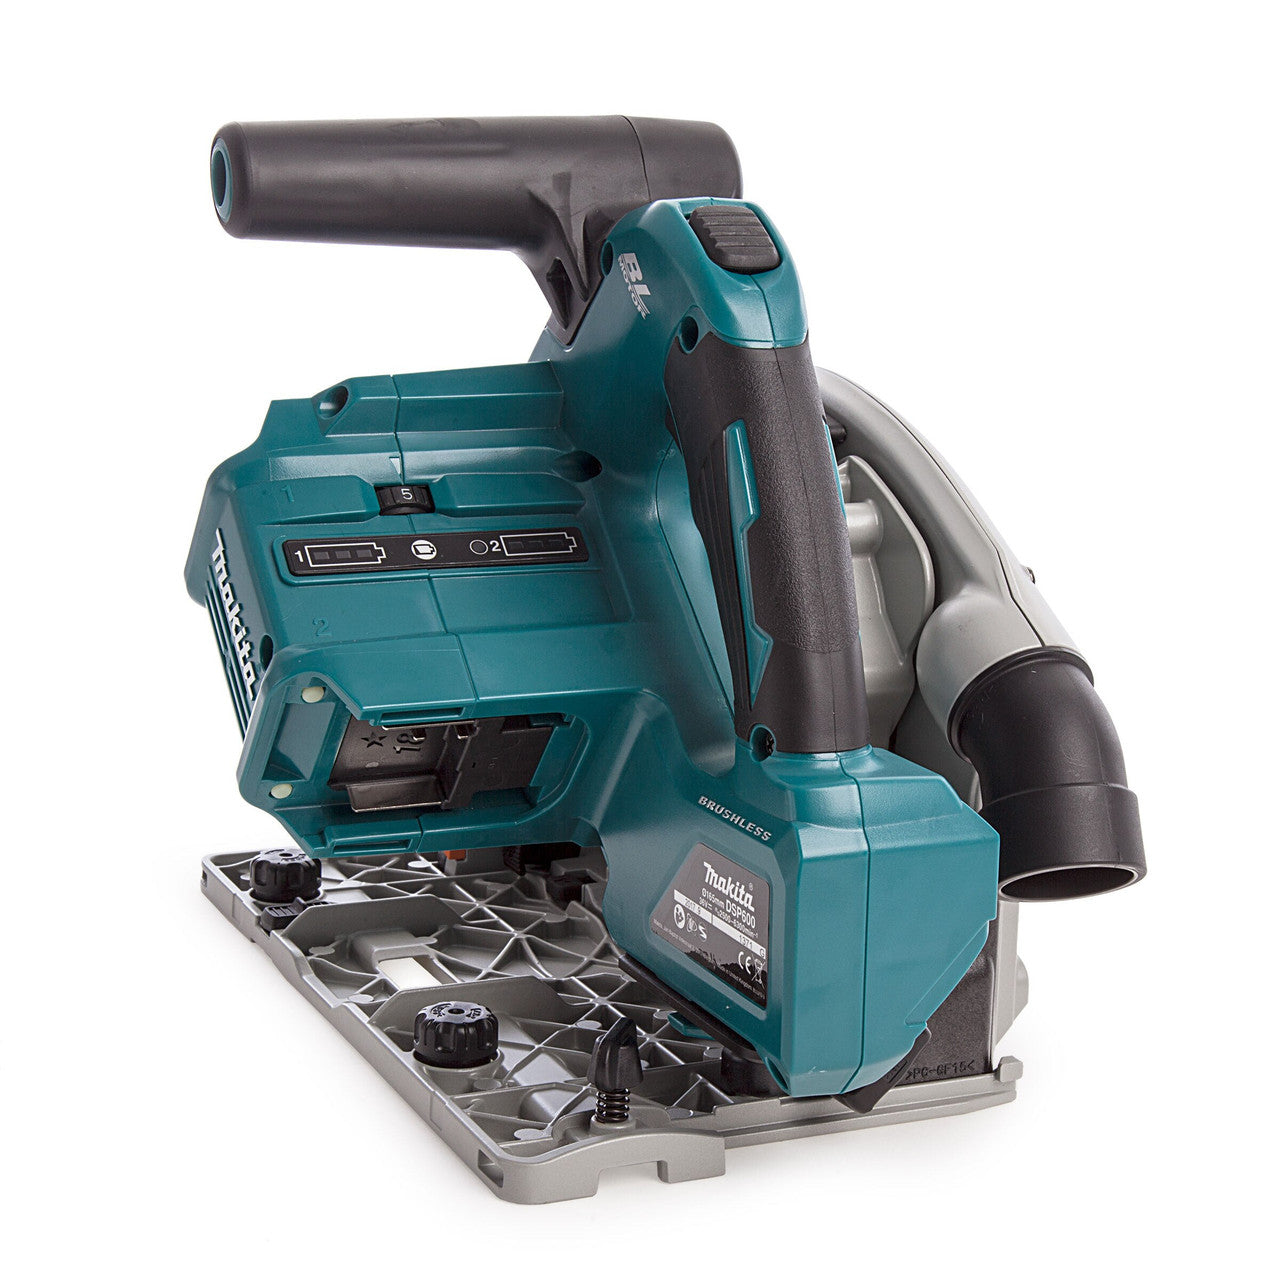 Makita DSP600ZJ 36V LXT 165mm Brushless Plunge Saw (Body Only) in MakPac Case